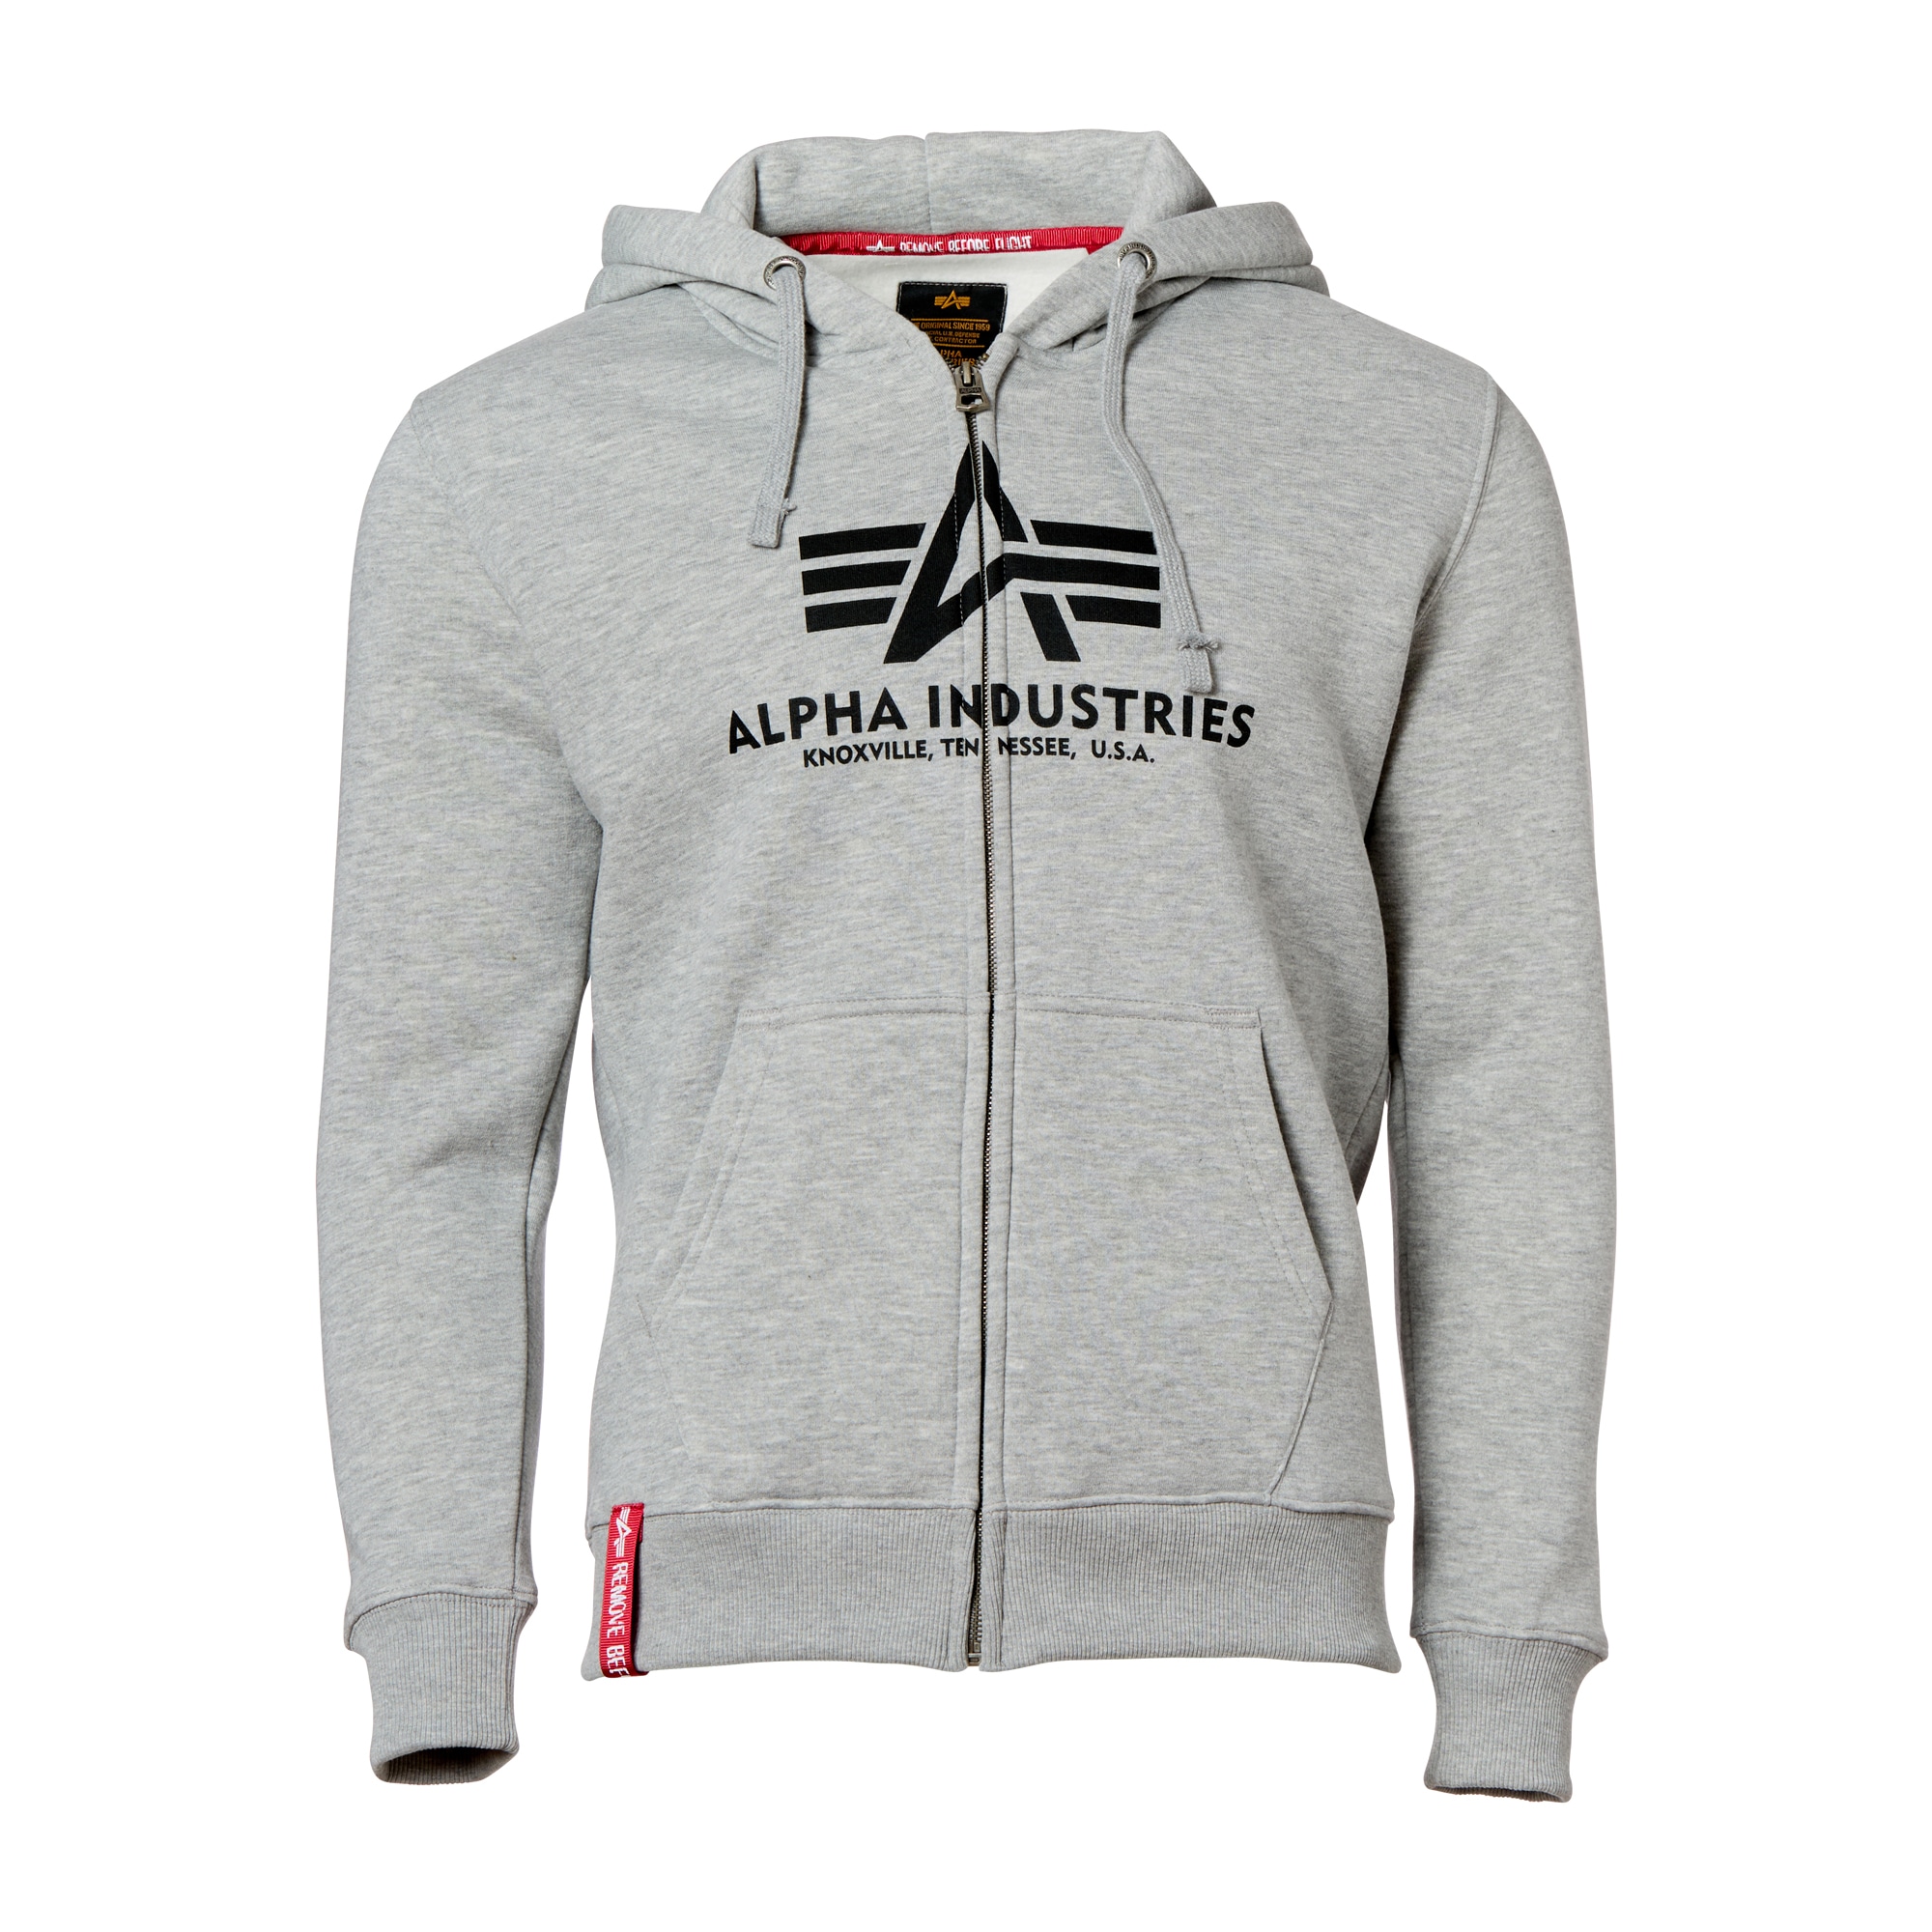 Purchase the Industries grey Basic Hoodie by heather A Zip Alpha